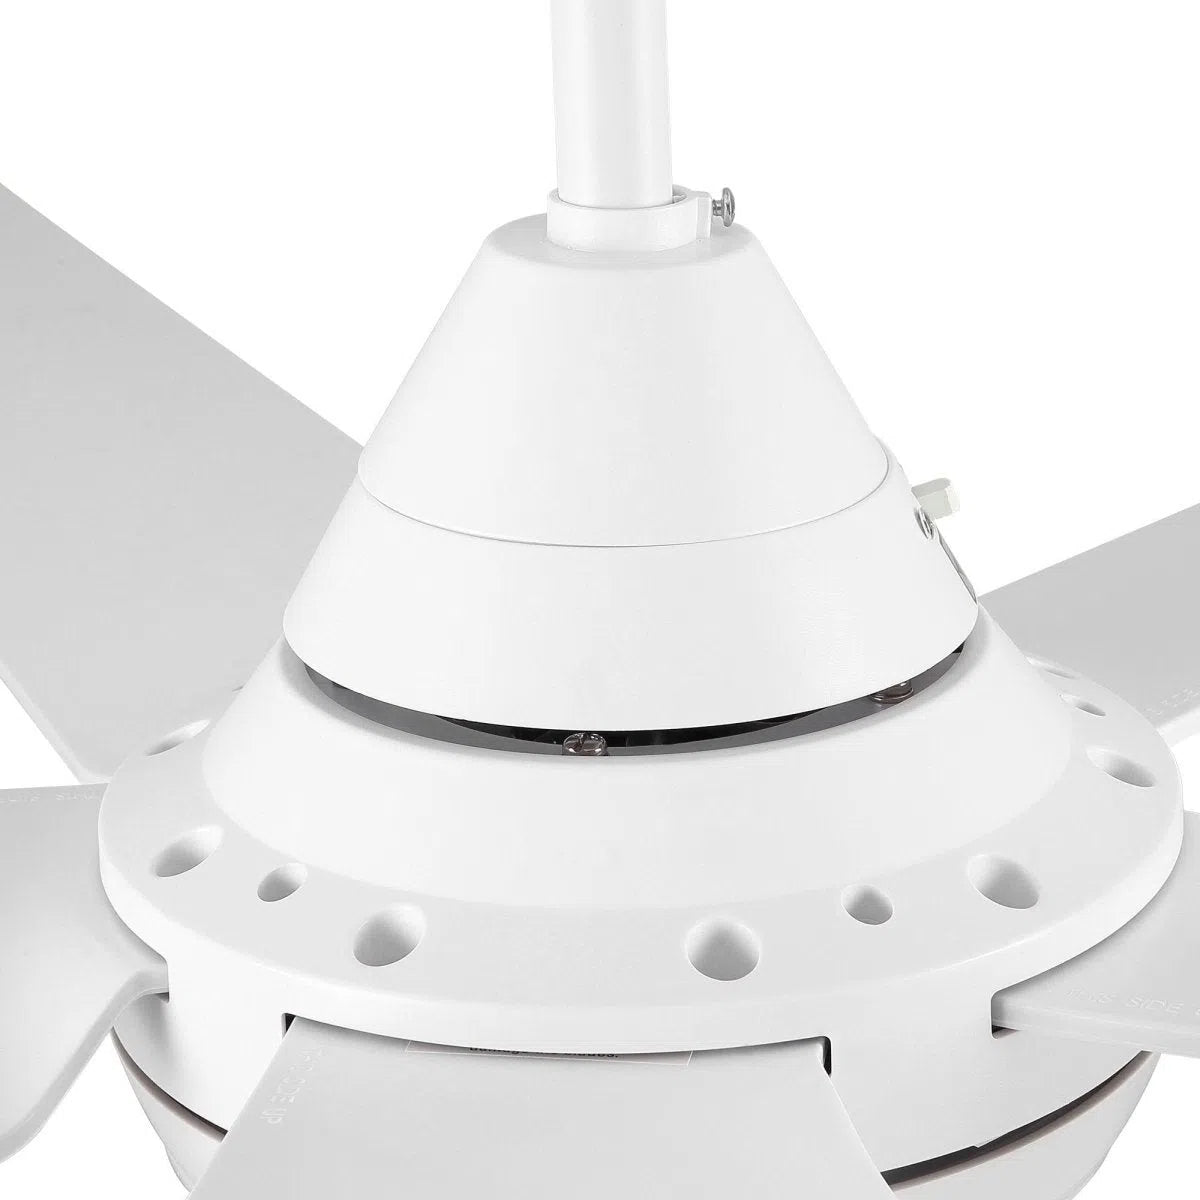 YUHAO Modern 48 in. Integrated LED Ceiling Fan Lighting with 5 White Blades Home Decor by Design